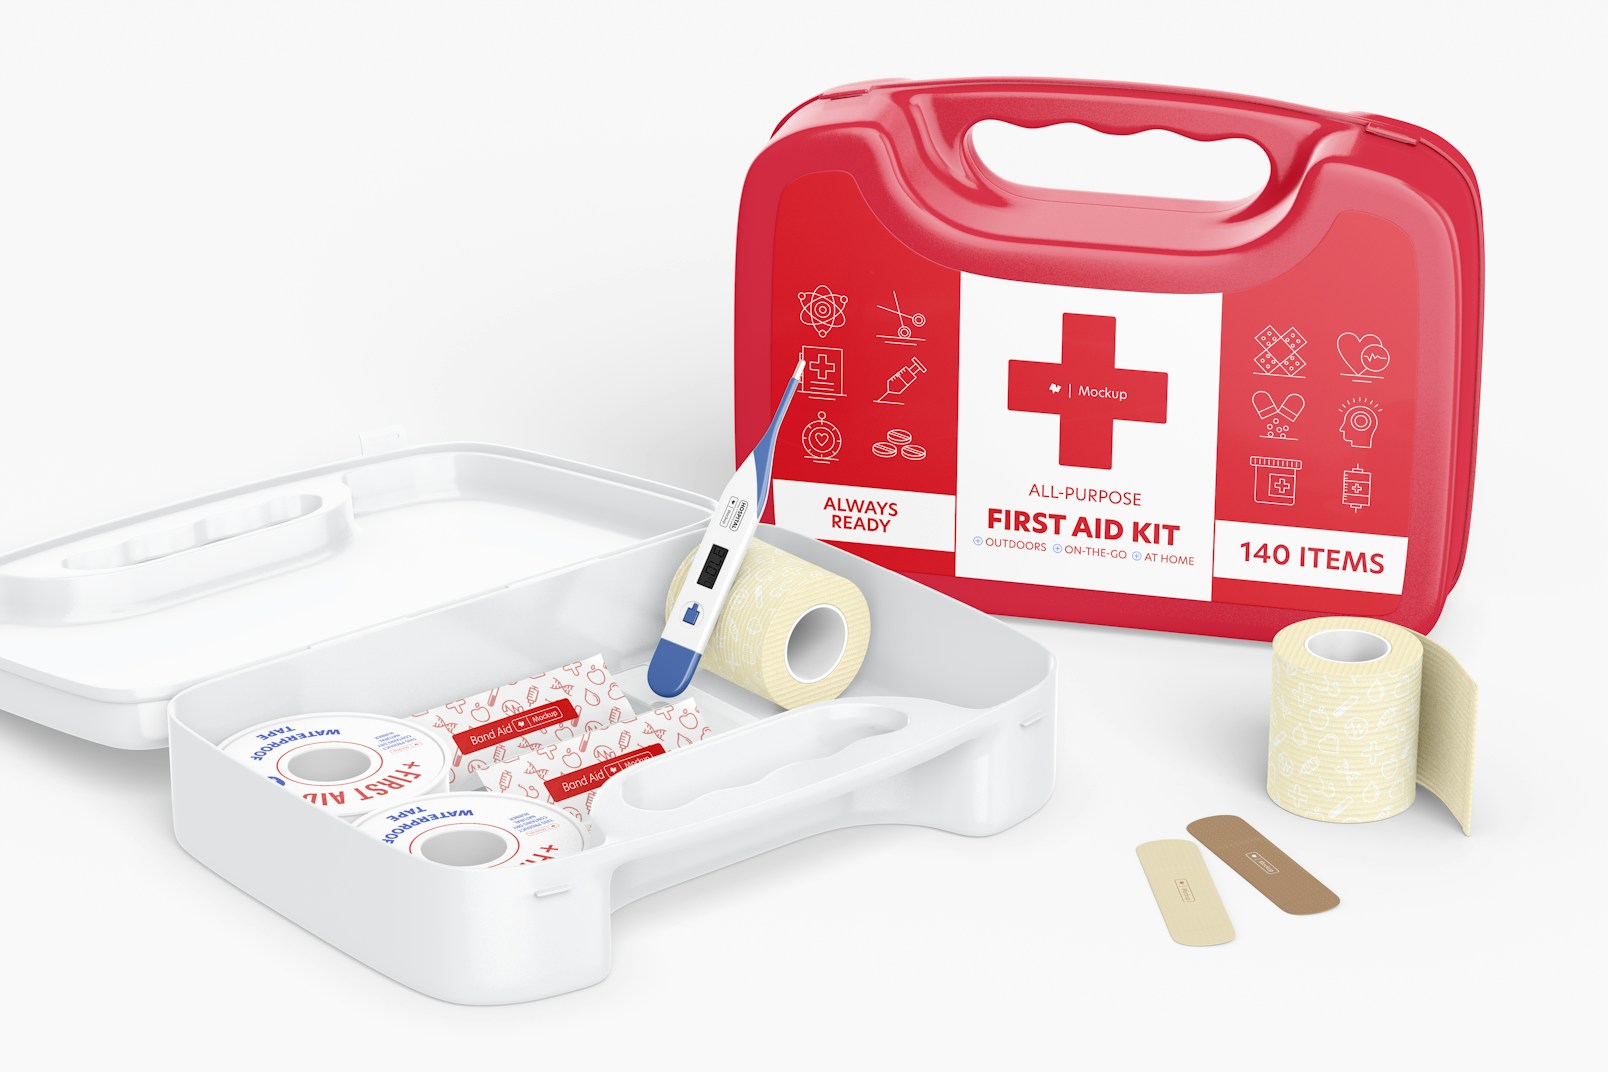 First Aid Kit Scenes Mockup, Opened and Closed